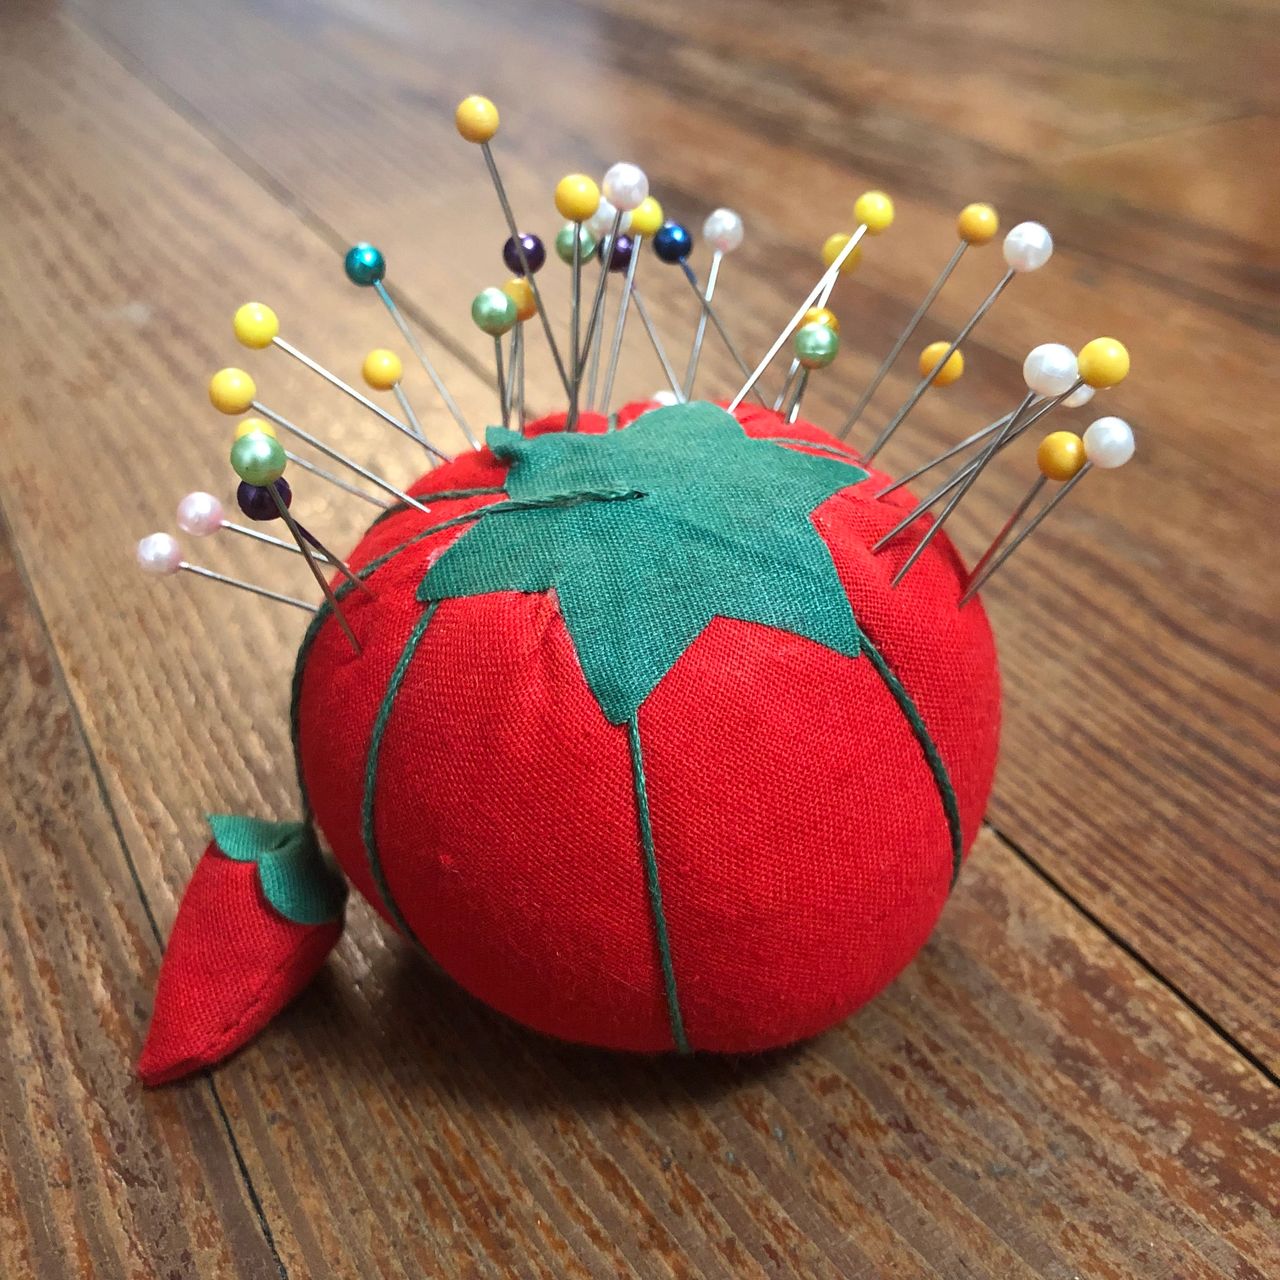 So what's with the tomato pin cushion?